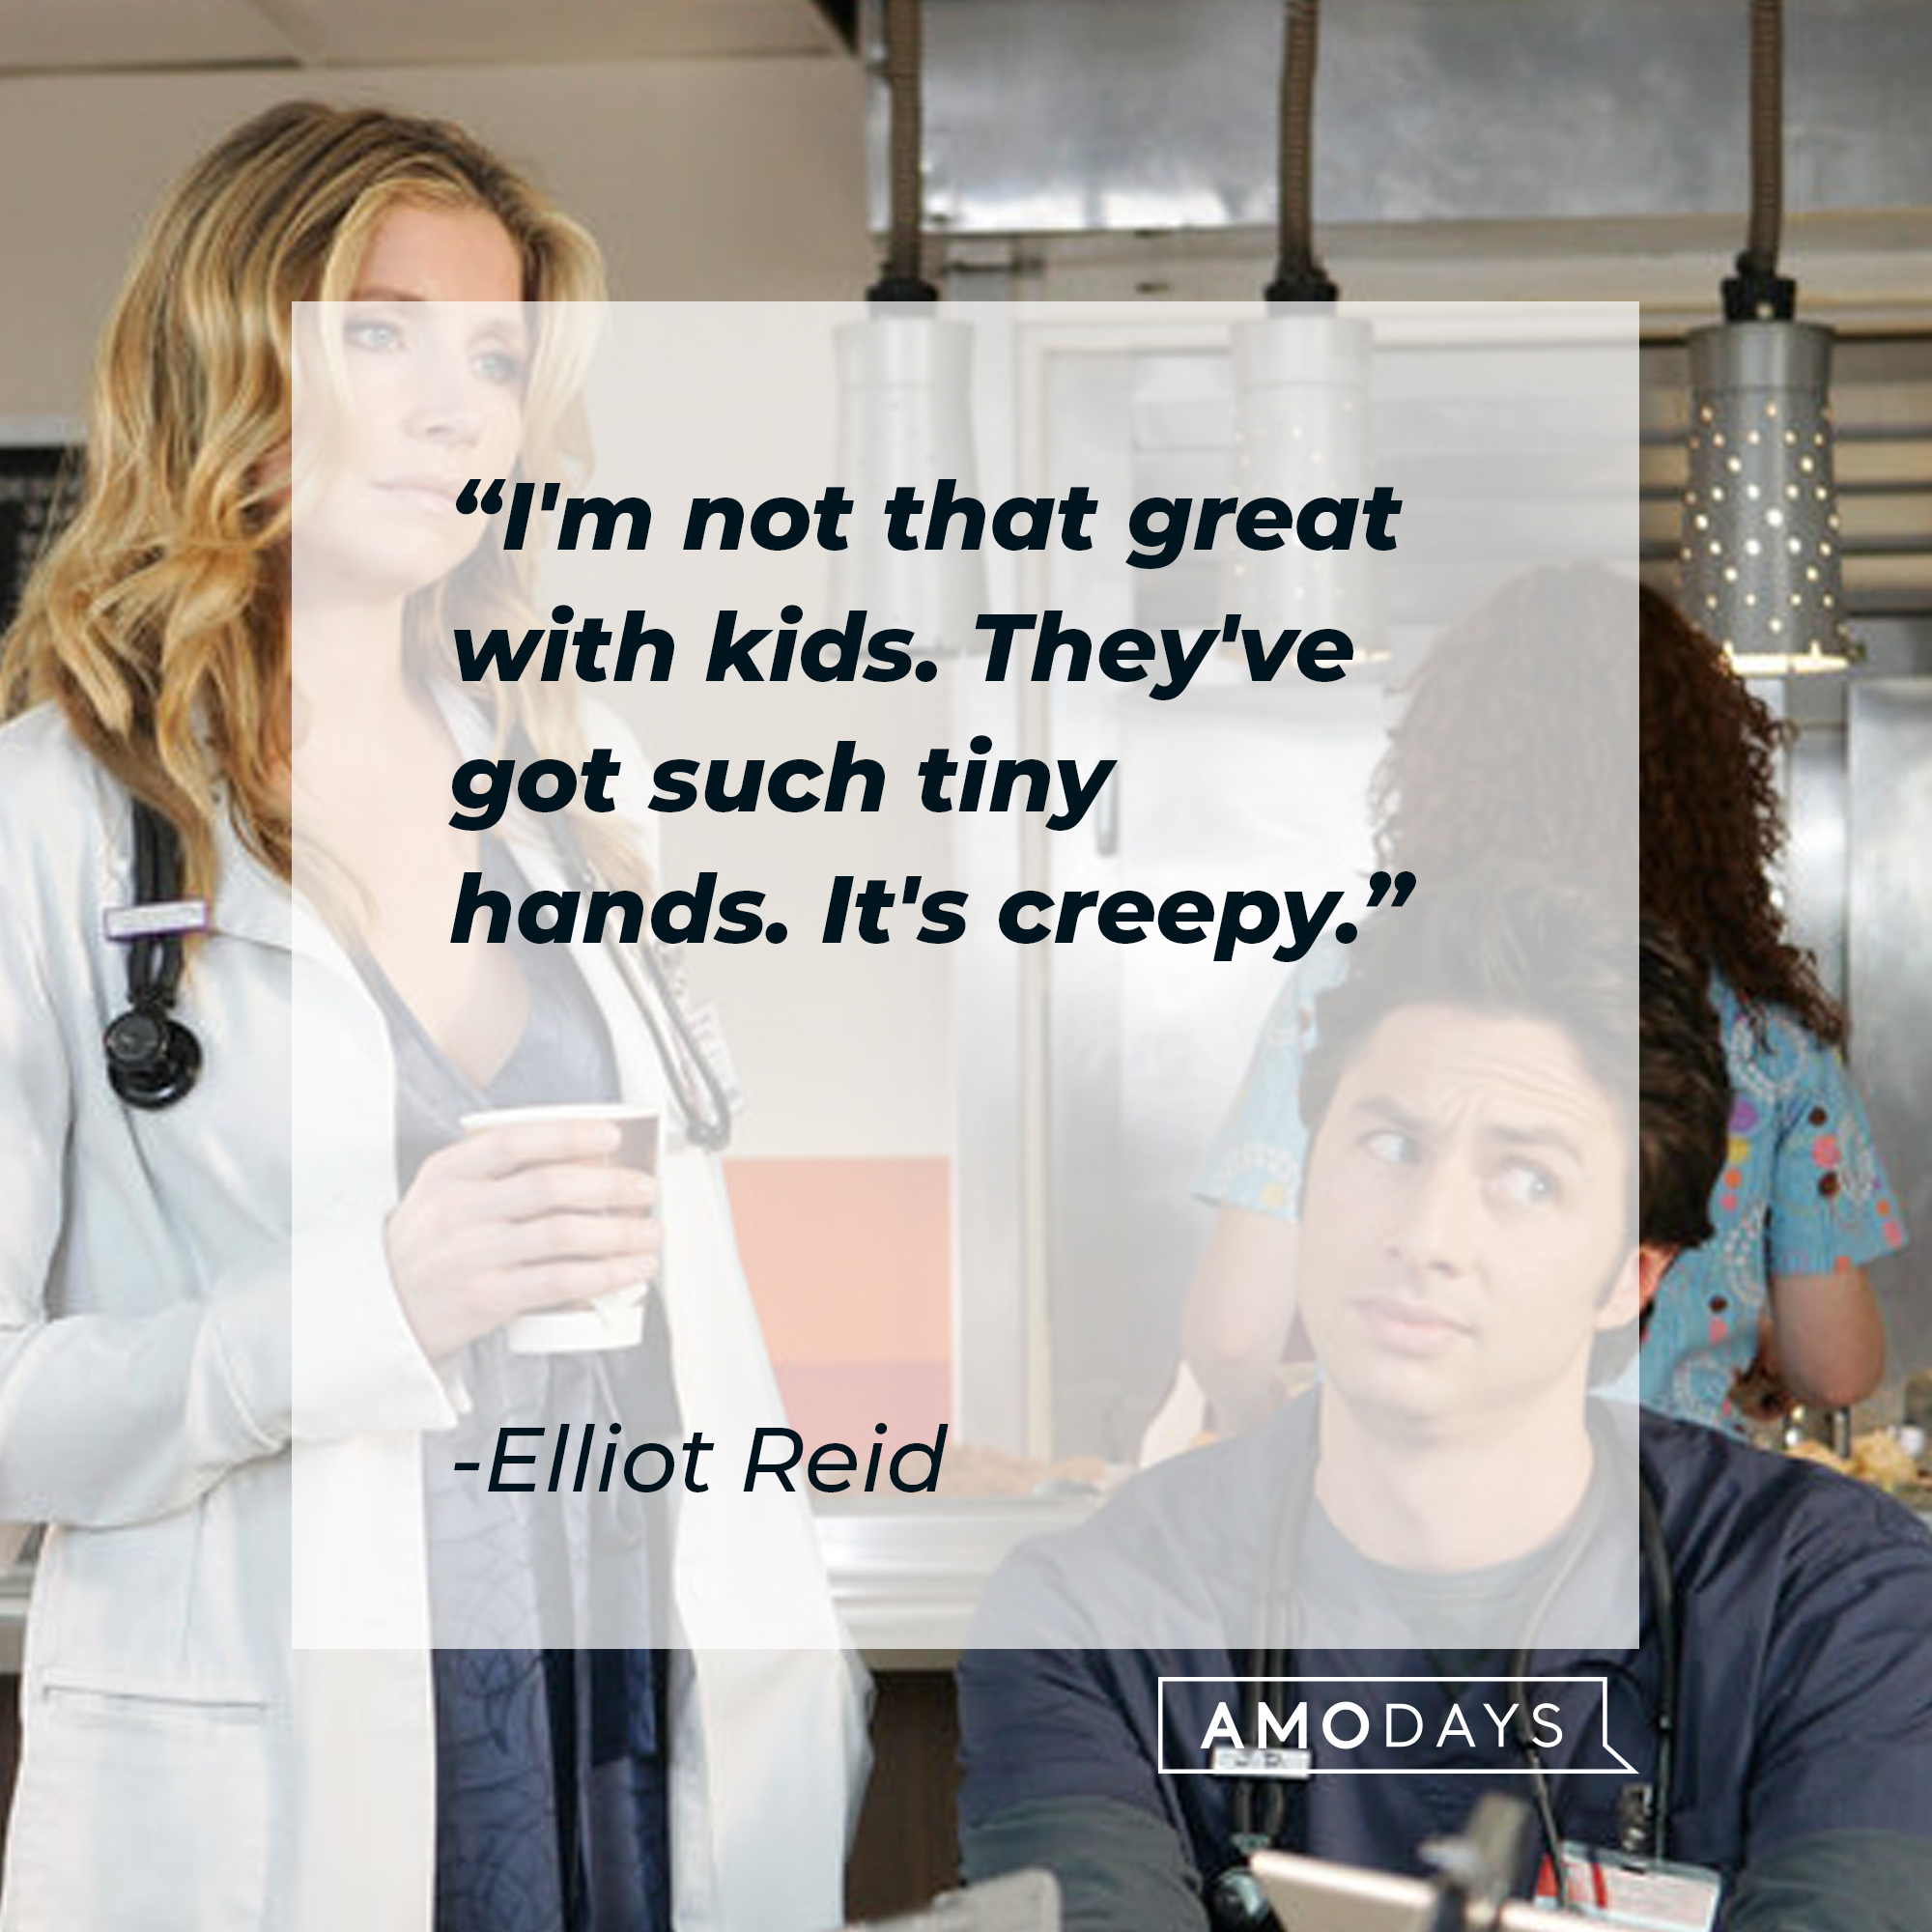 Elliot Reid and John 'J.D.' Dorian with Reid’s quote: “Yeah, I'm not that great with kids. They've got such tiny hands. It's creepy.” | Source: Facebook.com/scrubs